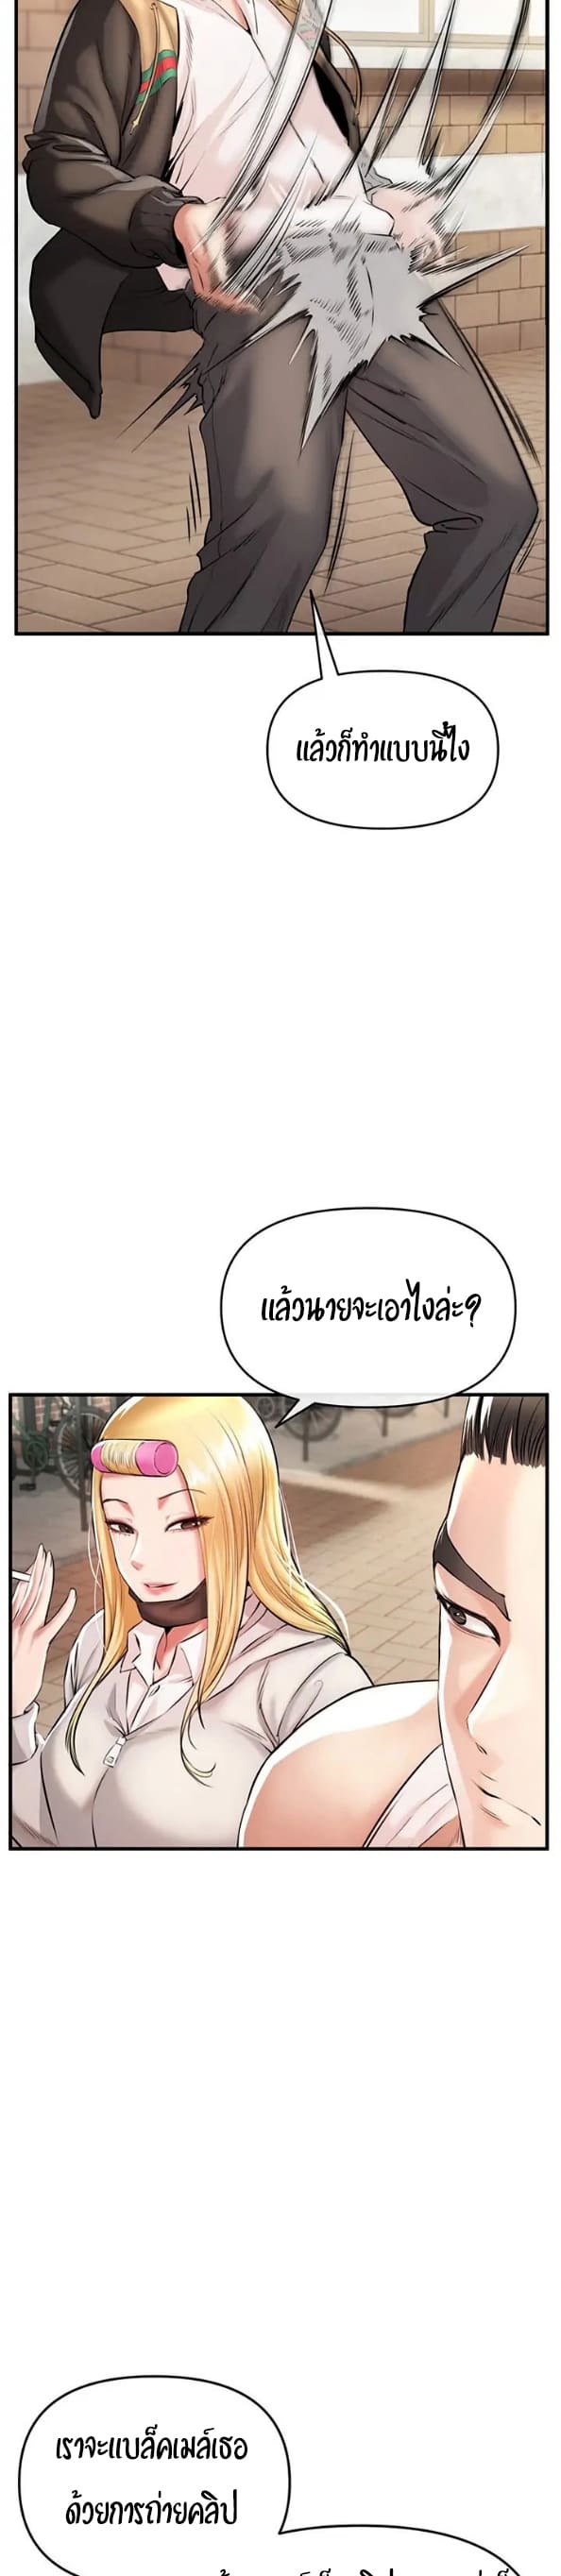 The Real Deal ตอนที่ 1 ภาพ 27